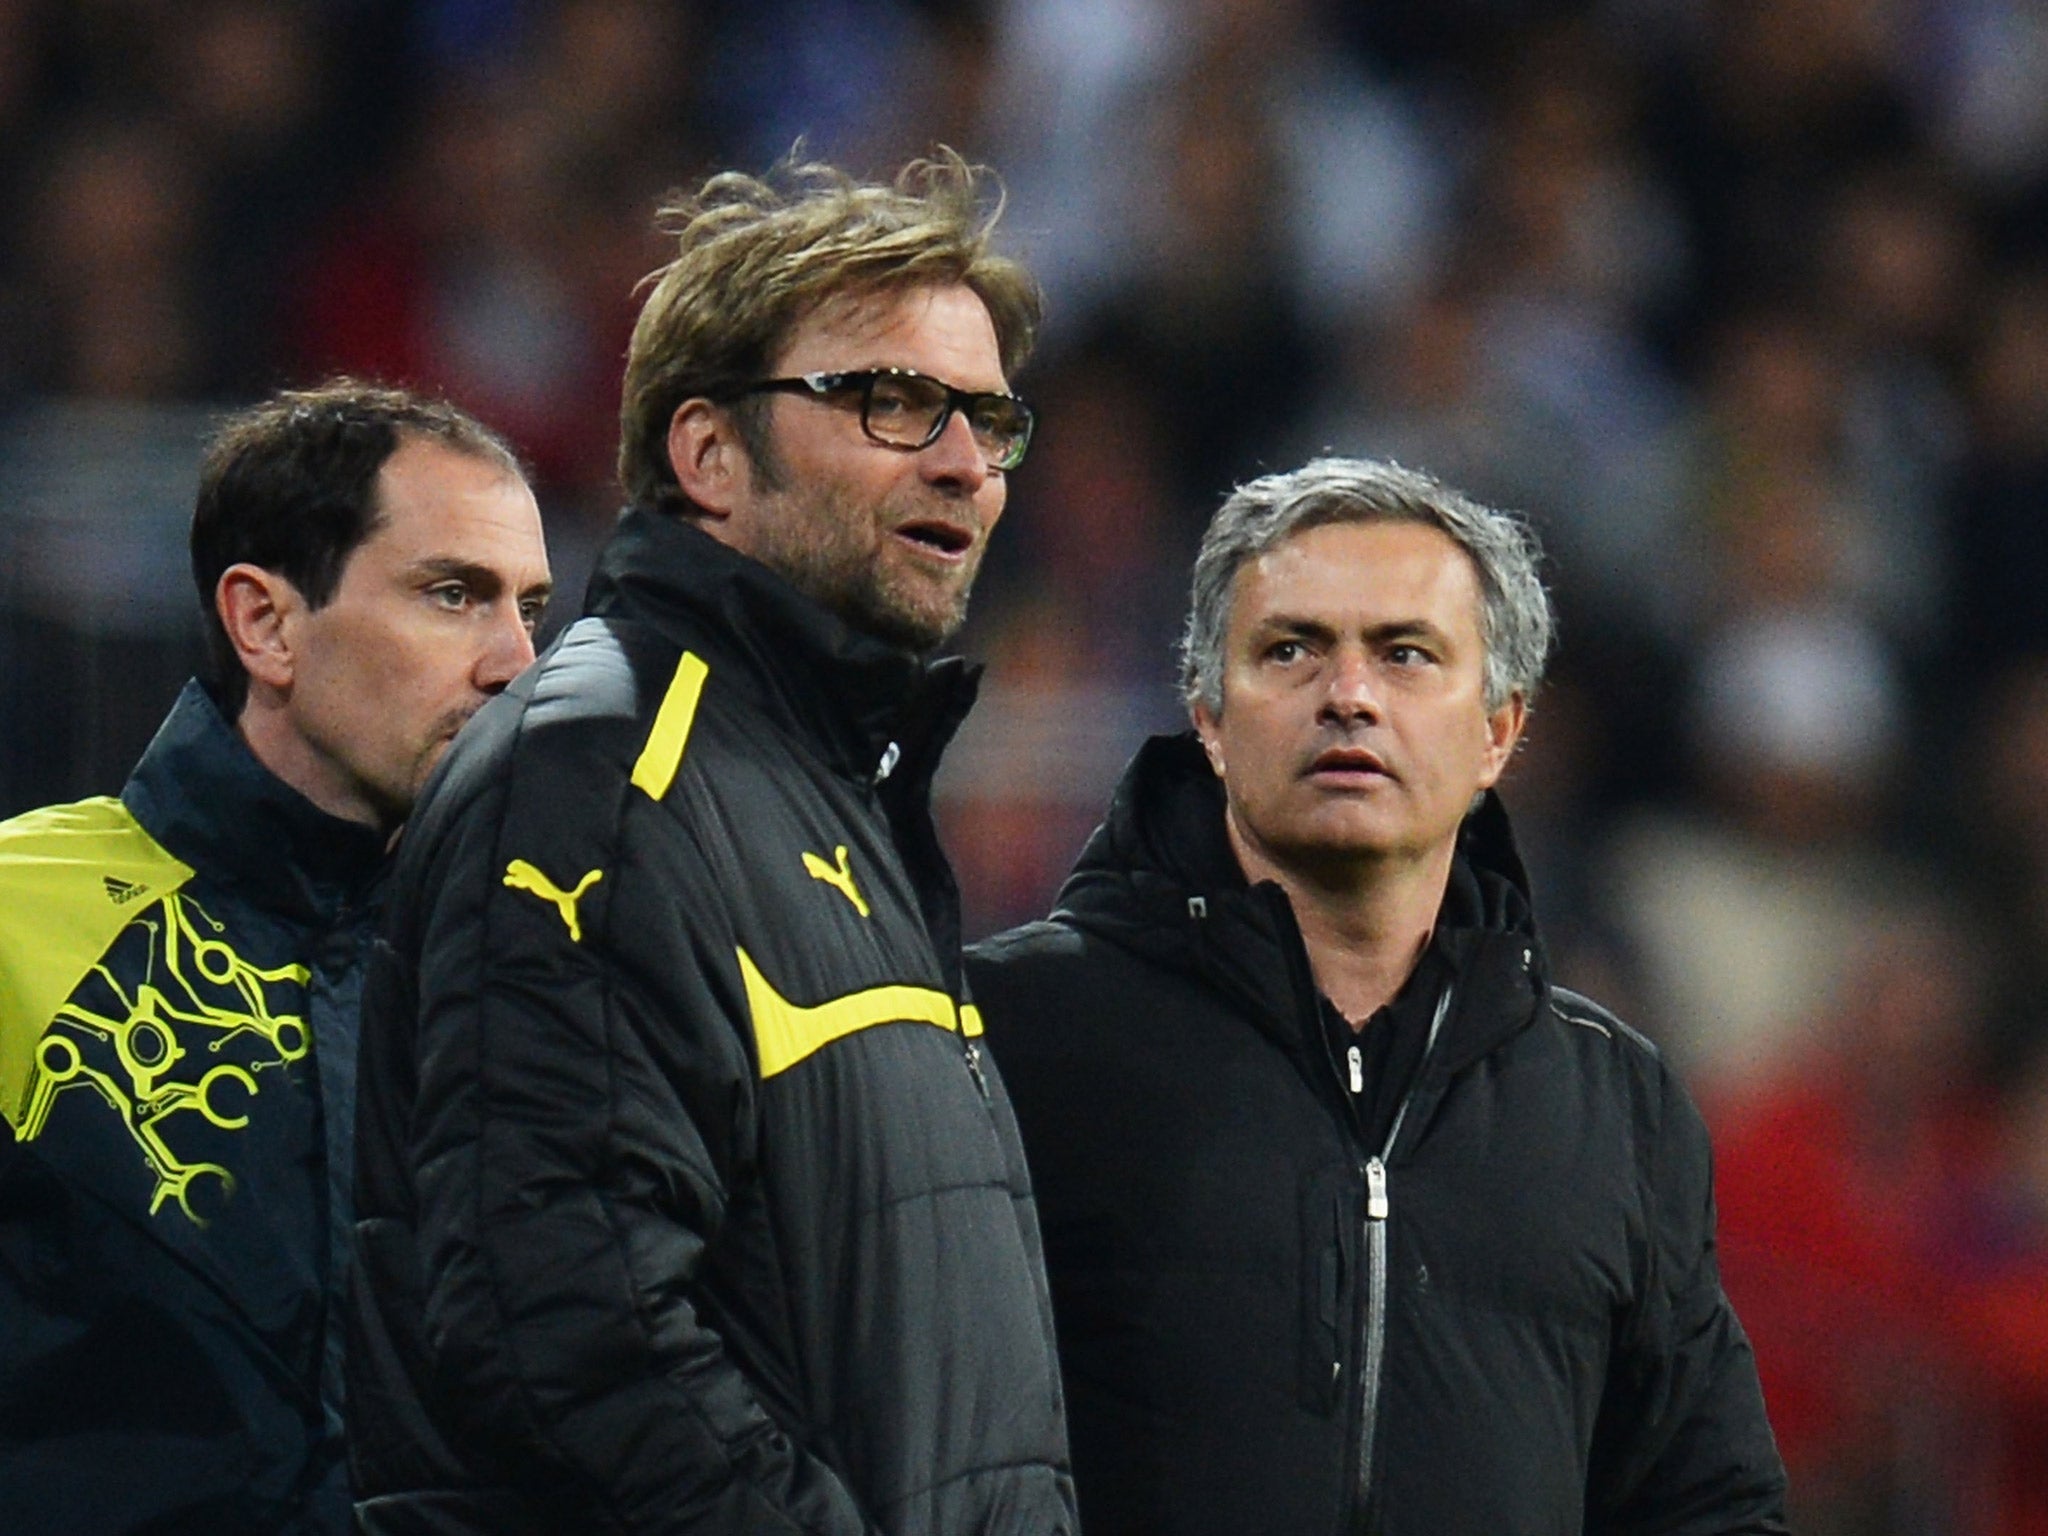 Klopp and Mourinho on the touchline during the 2013 Champions League semi-finals